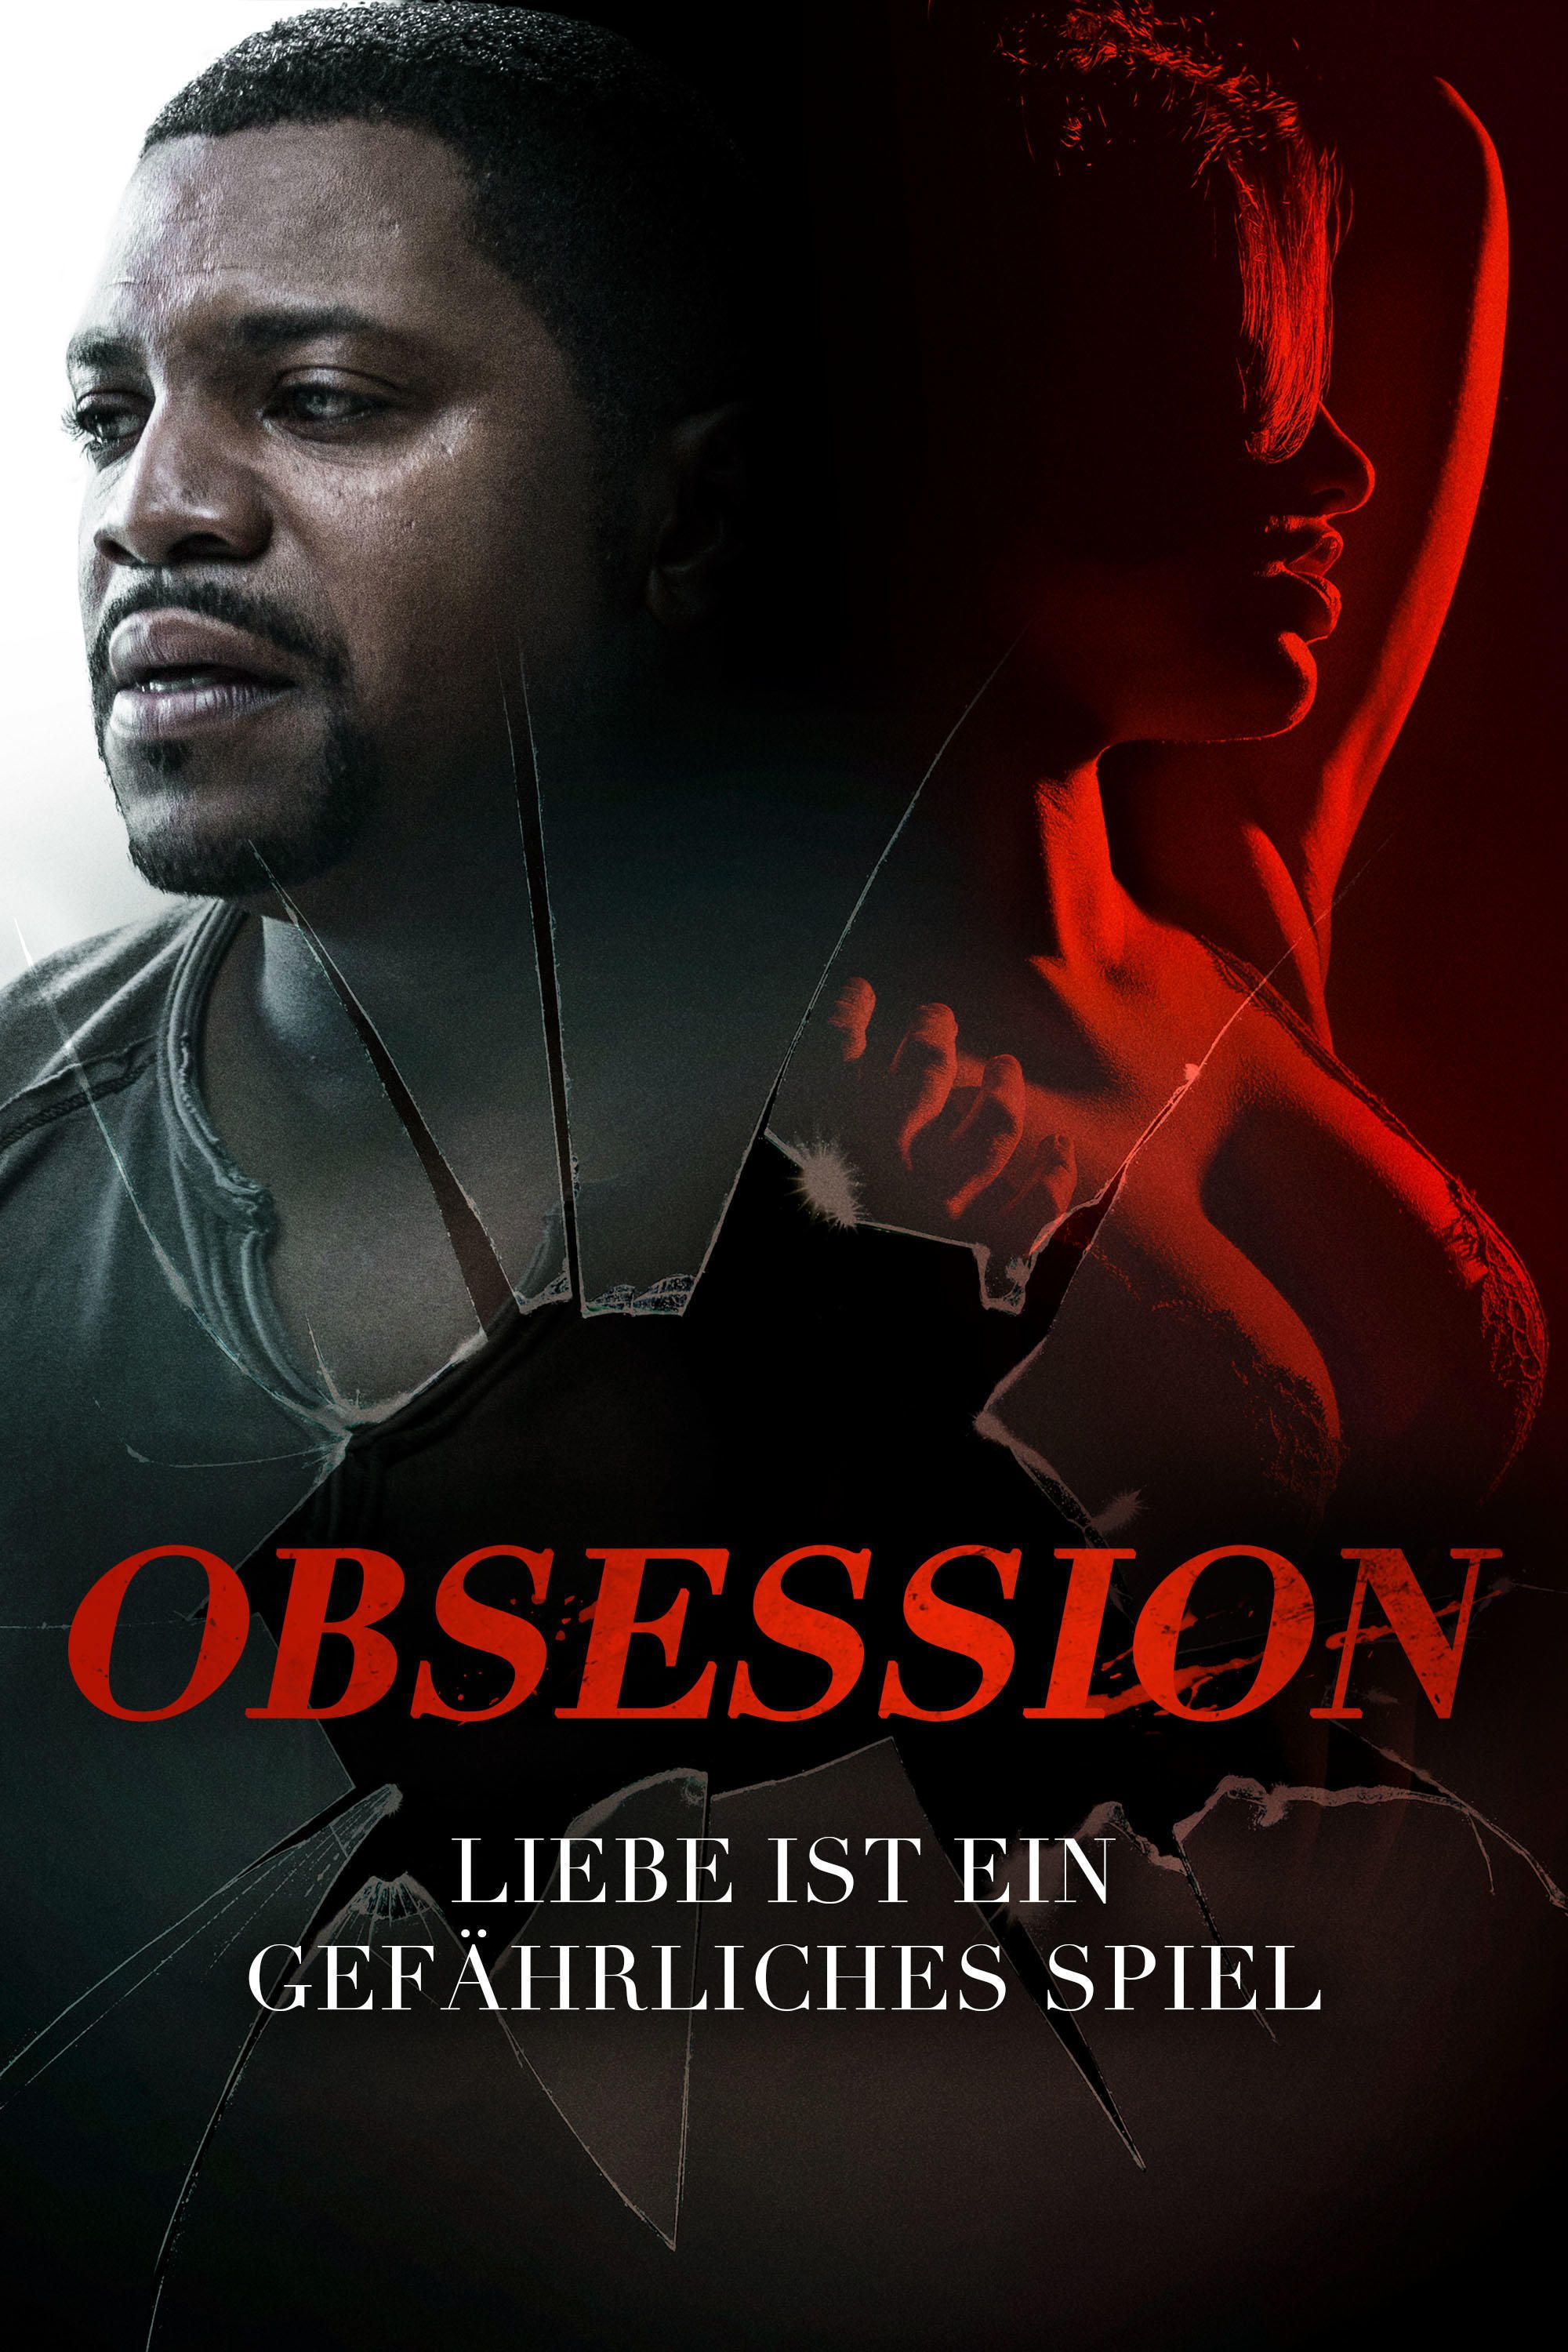 obsession movie review 2019